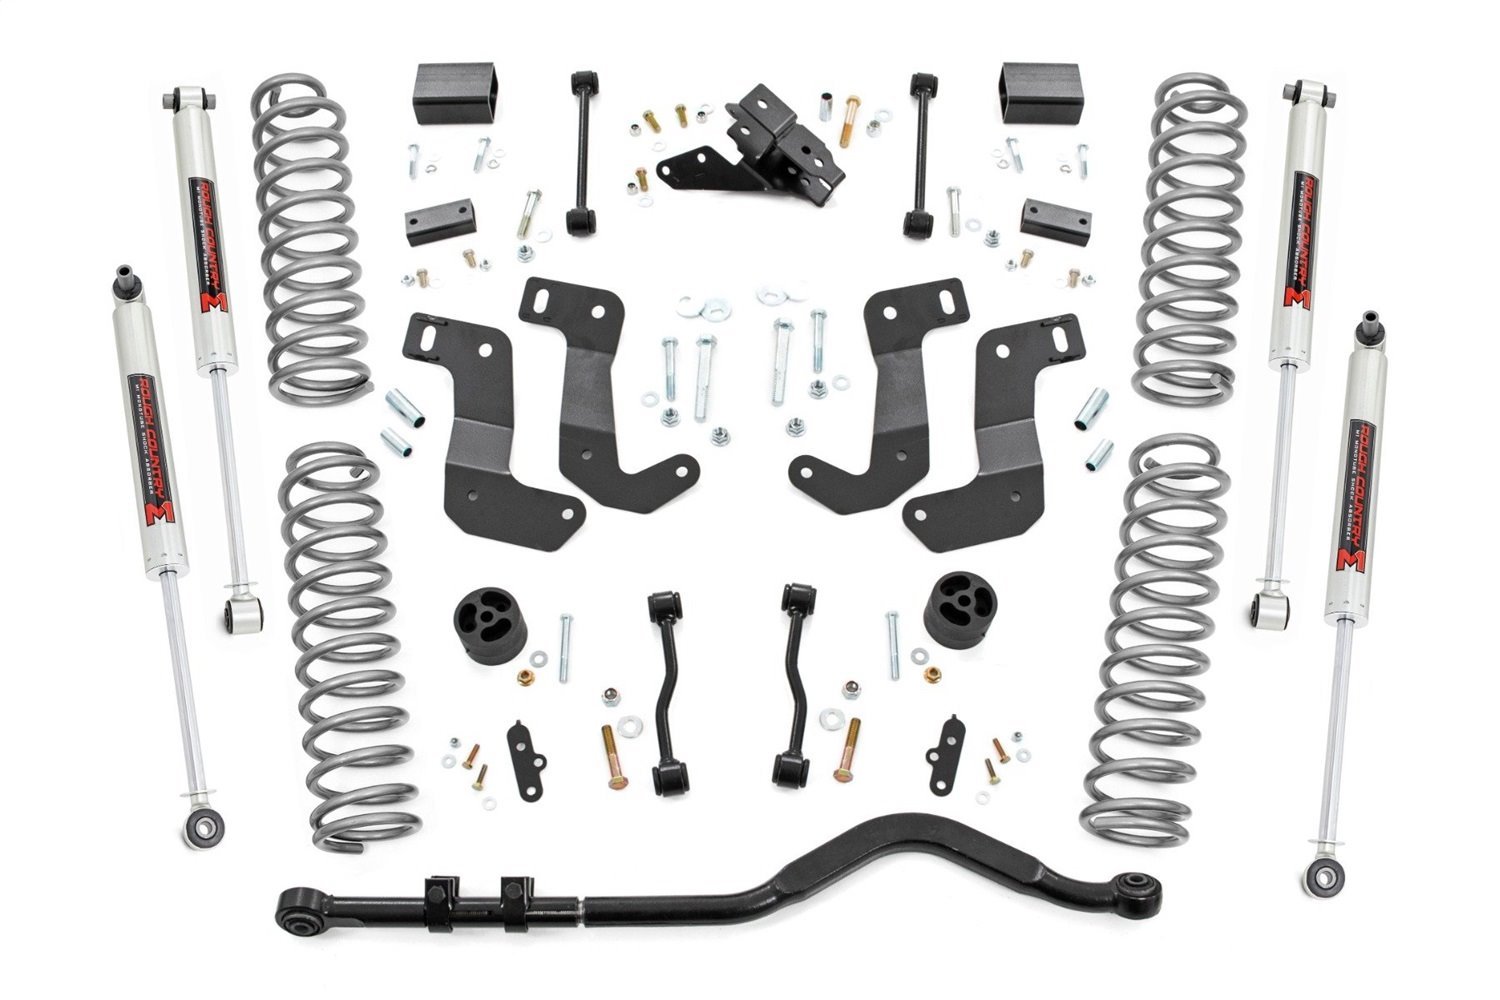 79240 3.5 in. Lift Kit, C/A Drop, Stage 1, M1, Fits Select Jeep Wrangler JL